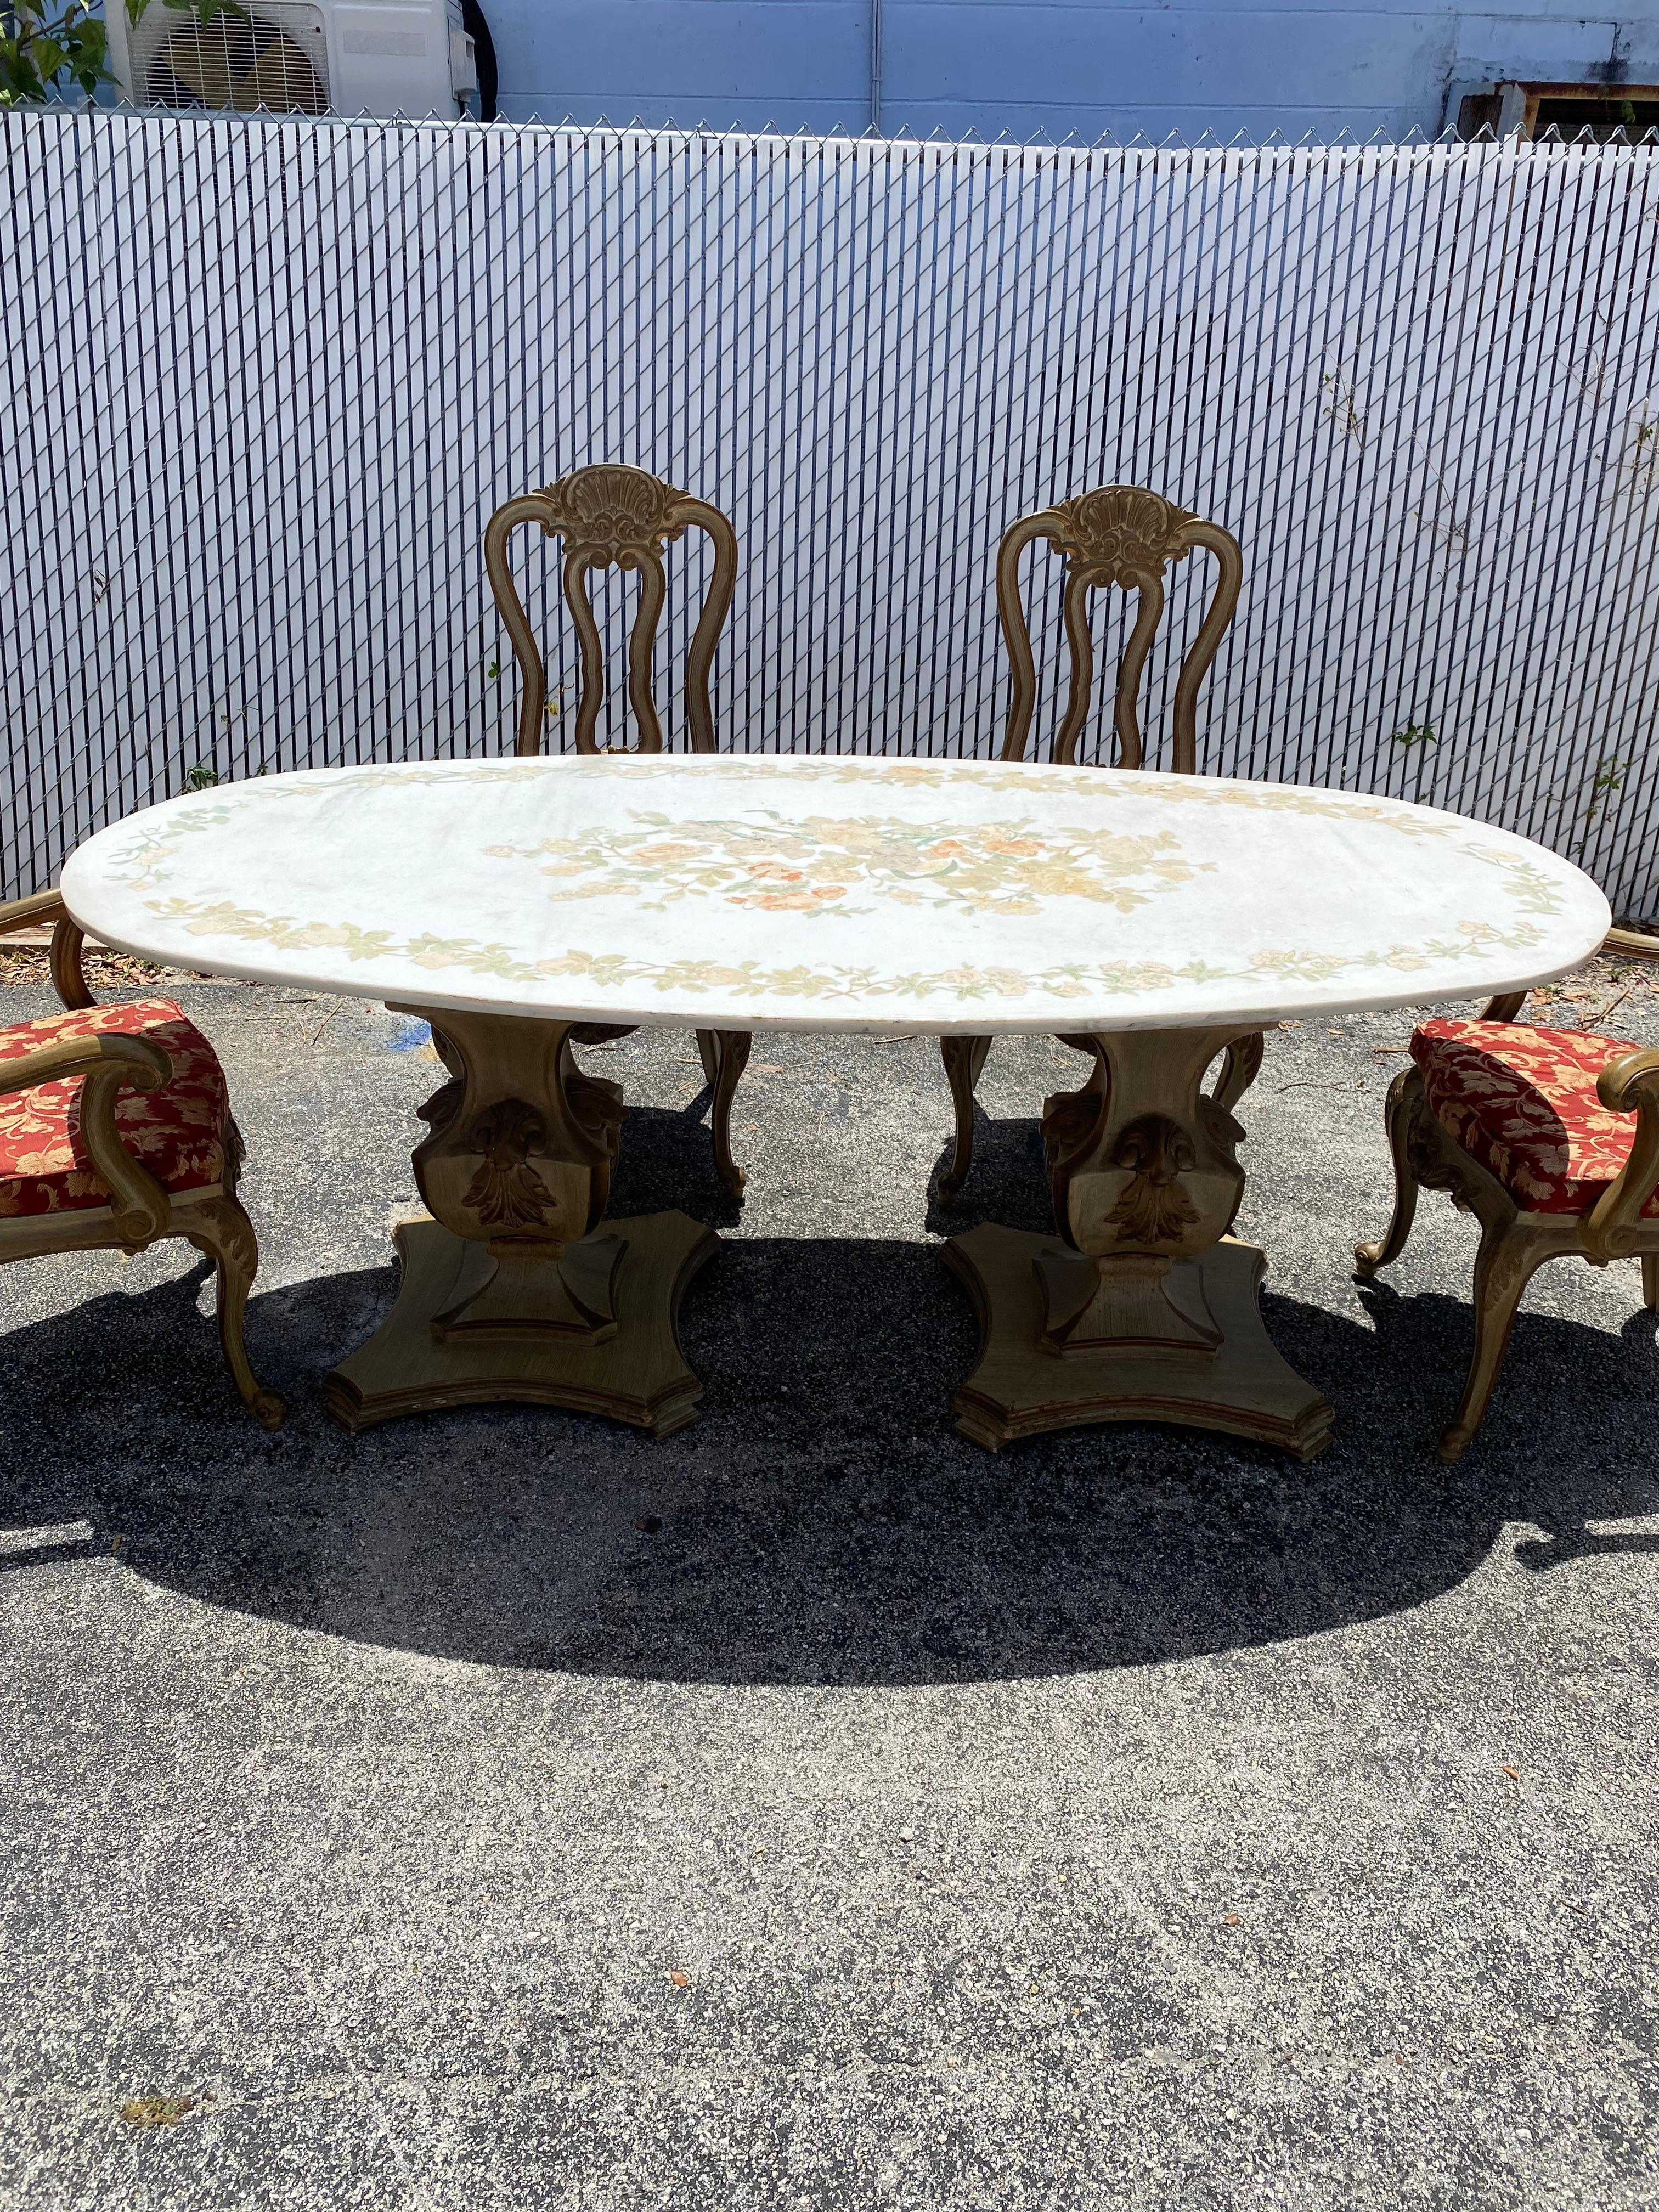 20th Century Marble Floral Inlaid Painted Oval Wood French Dining Table and Chairs, Set of 7 For Sale